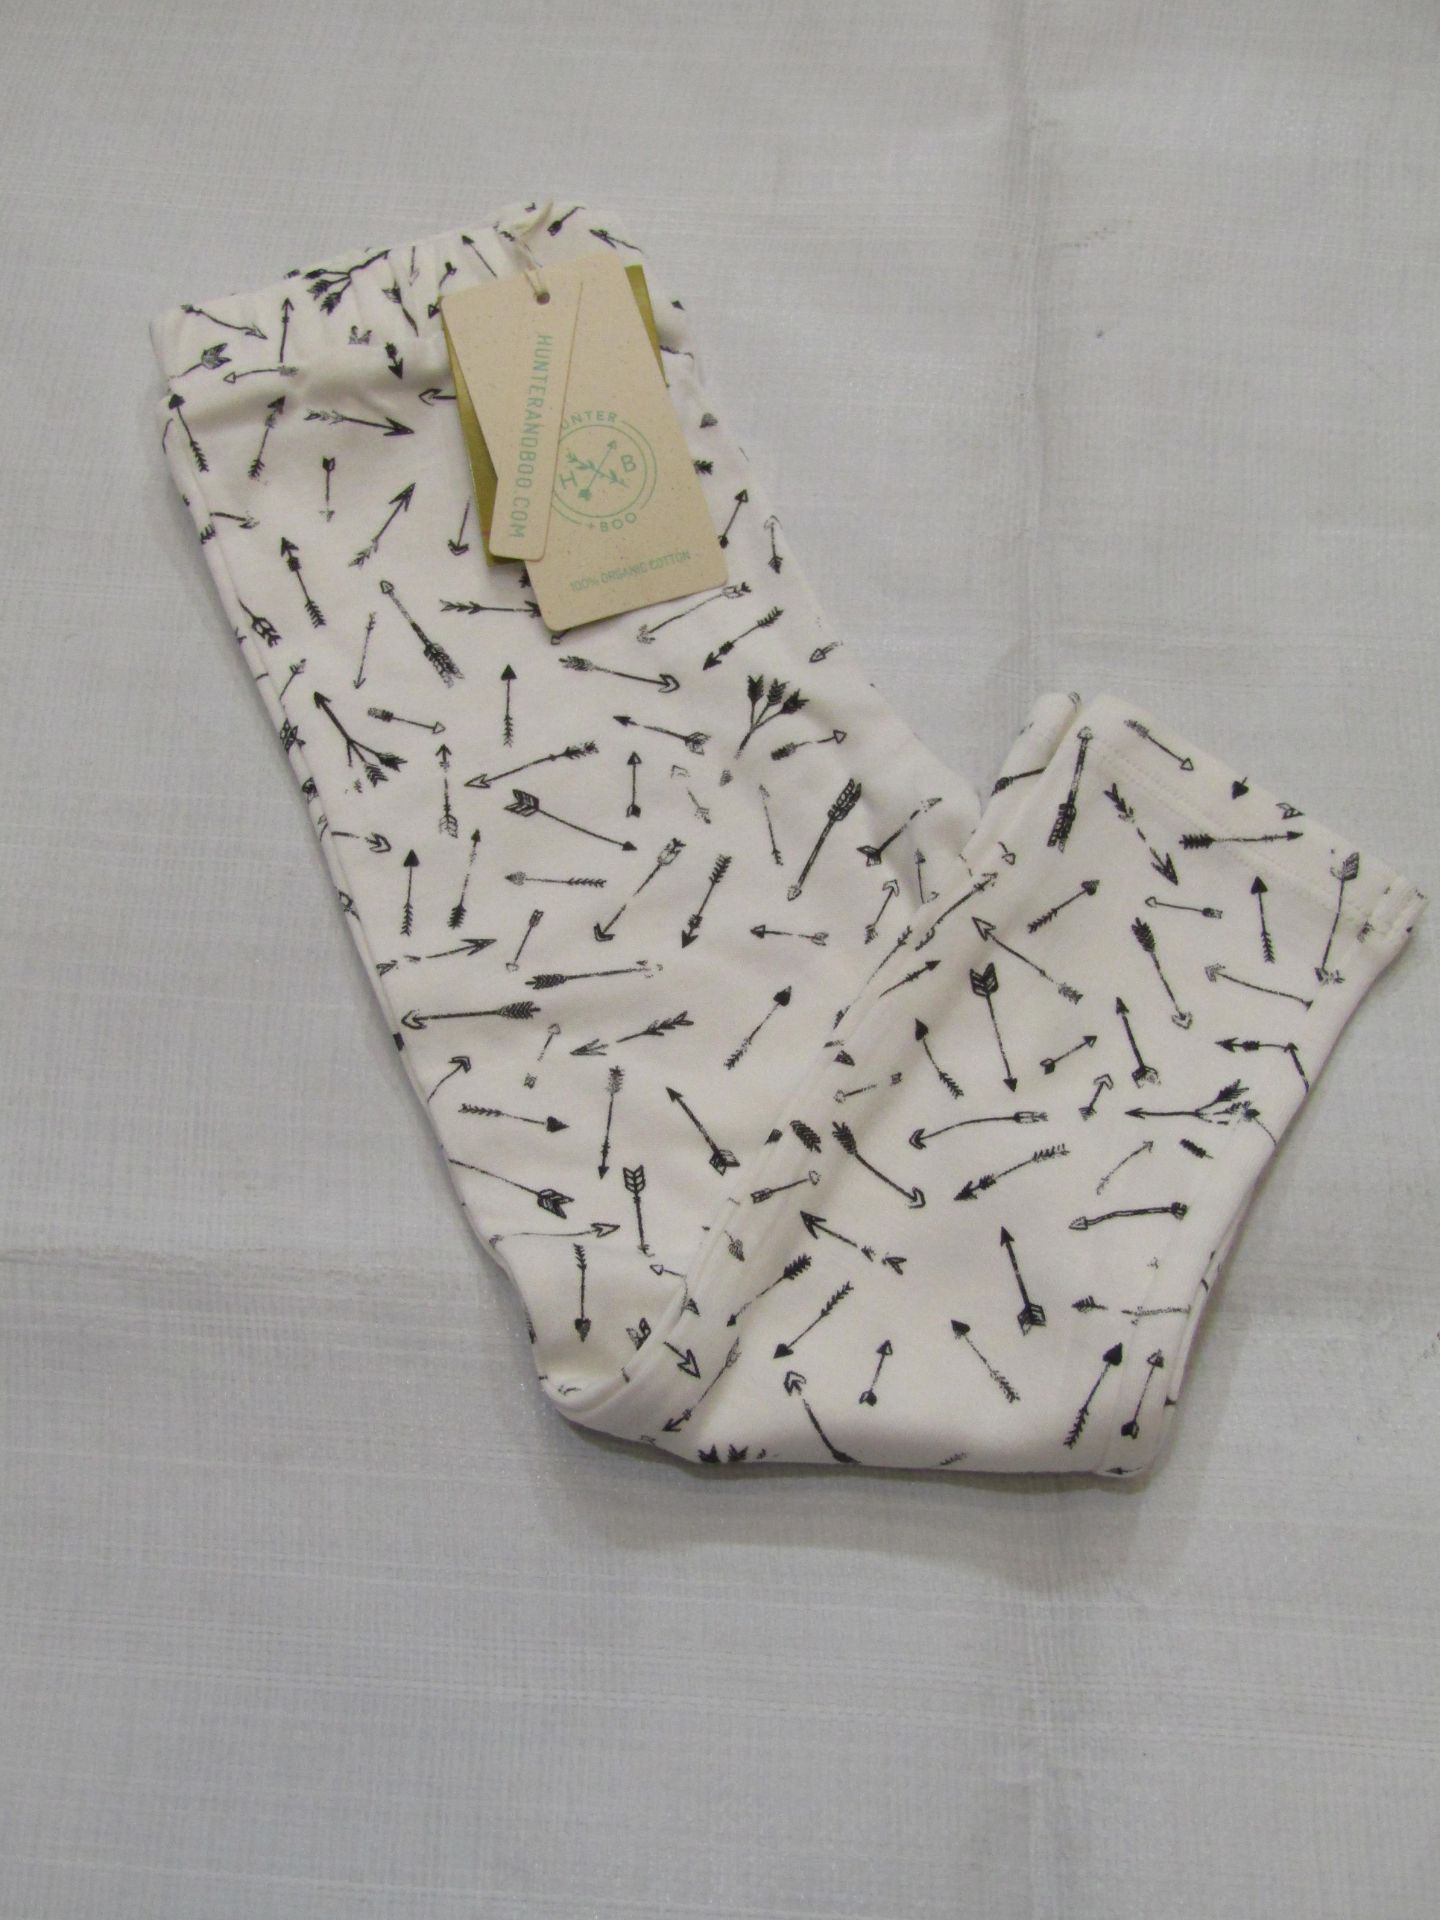 2 X Hunter & Boo Arrow Print Leggings Aged 2-3 yrs New & Packaged RRP £13 Each - Image 2 of 2